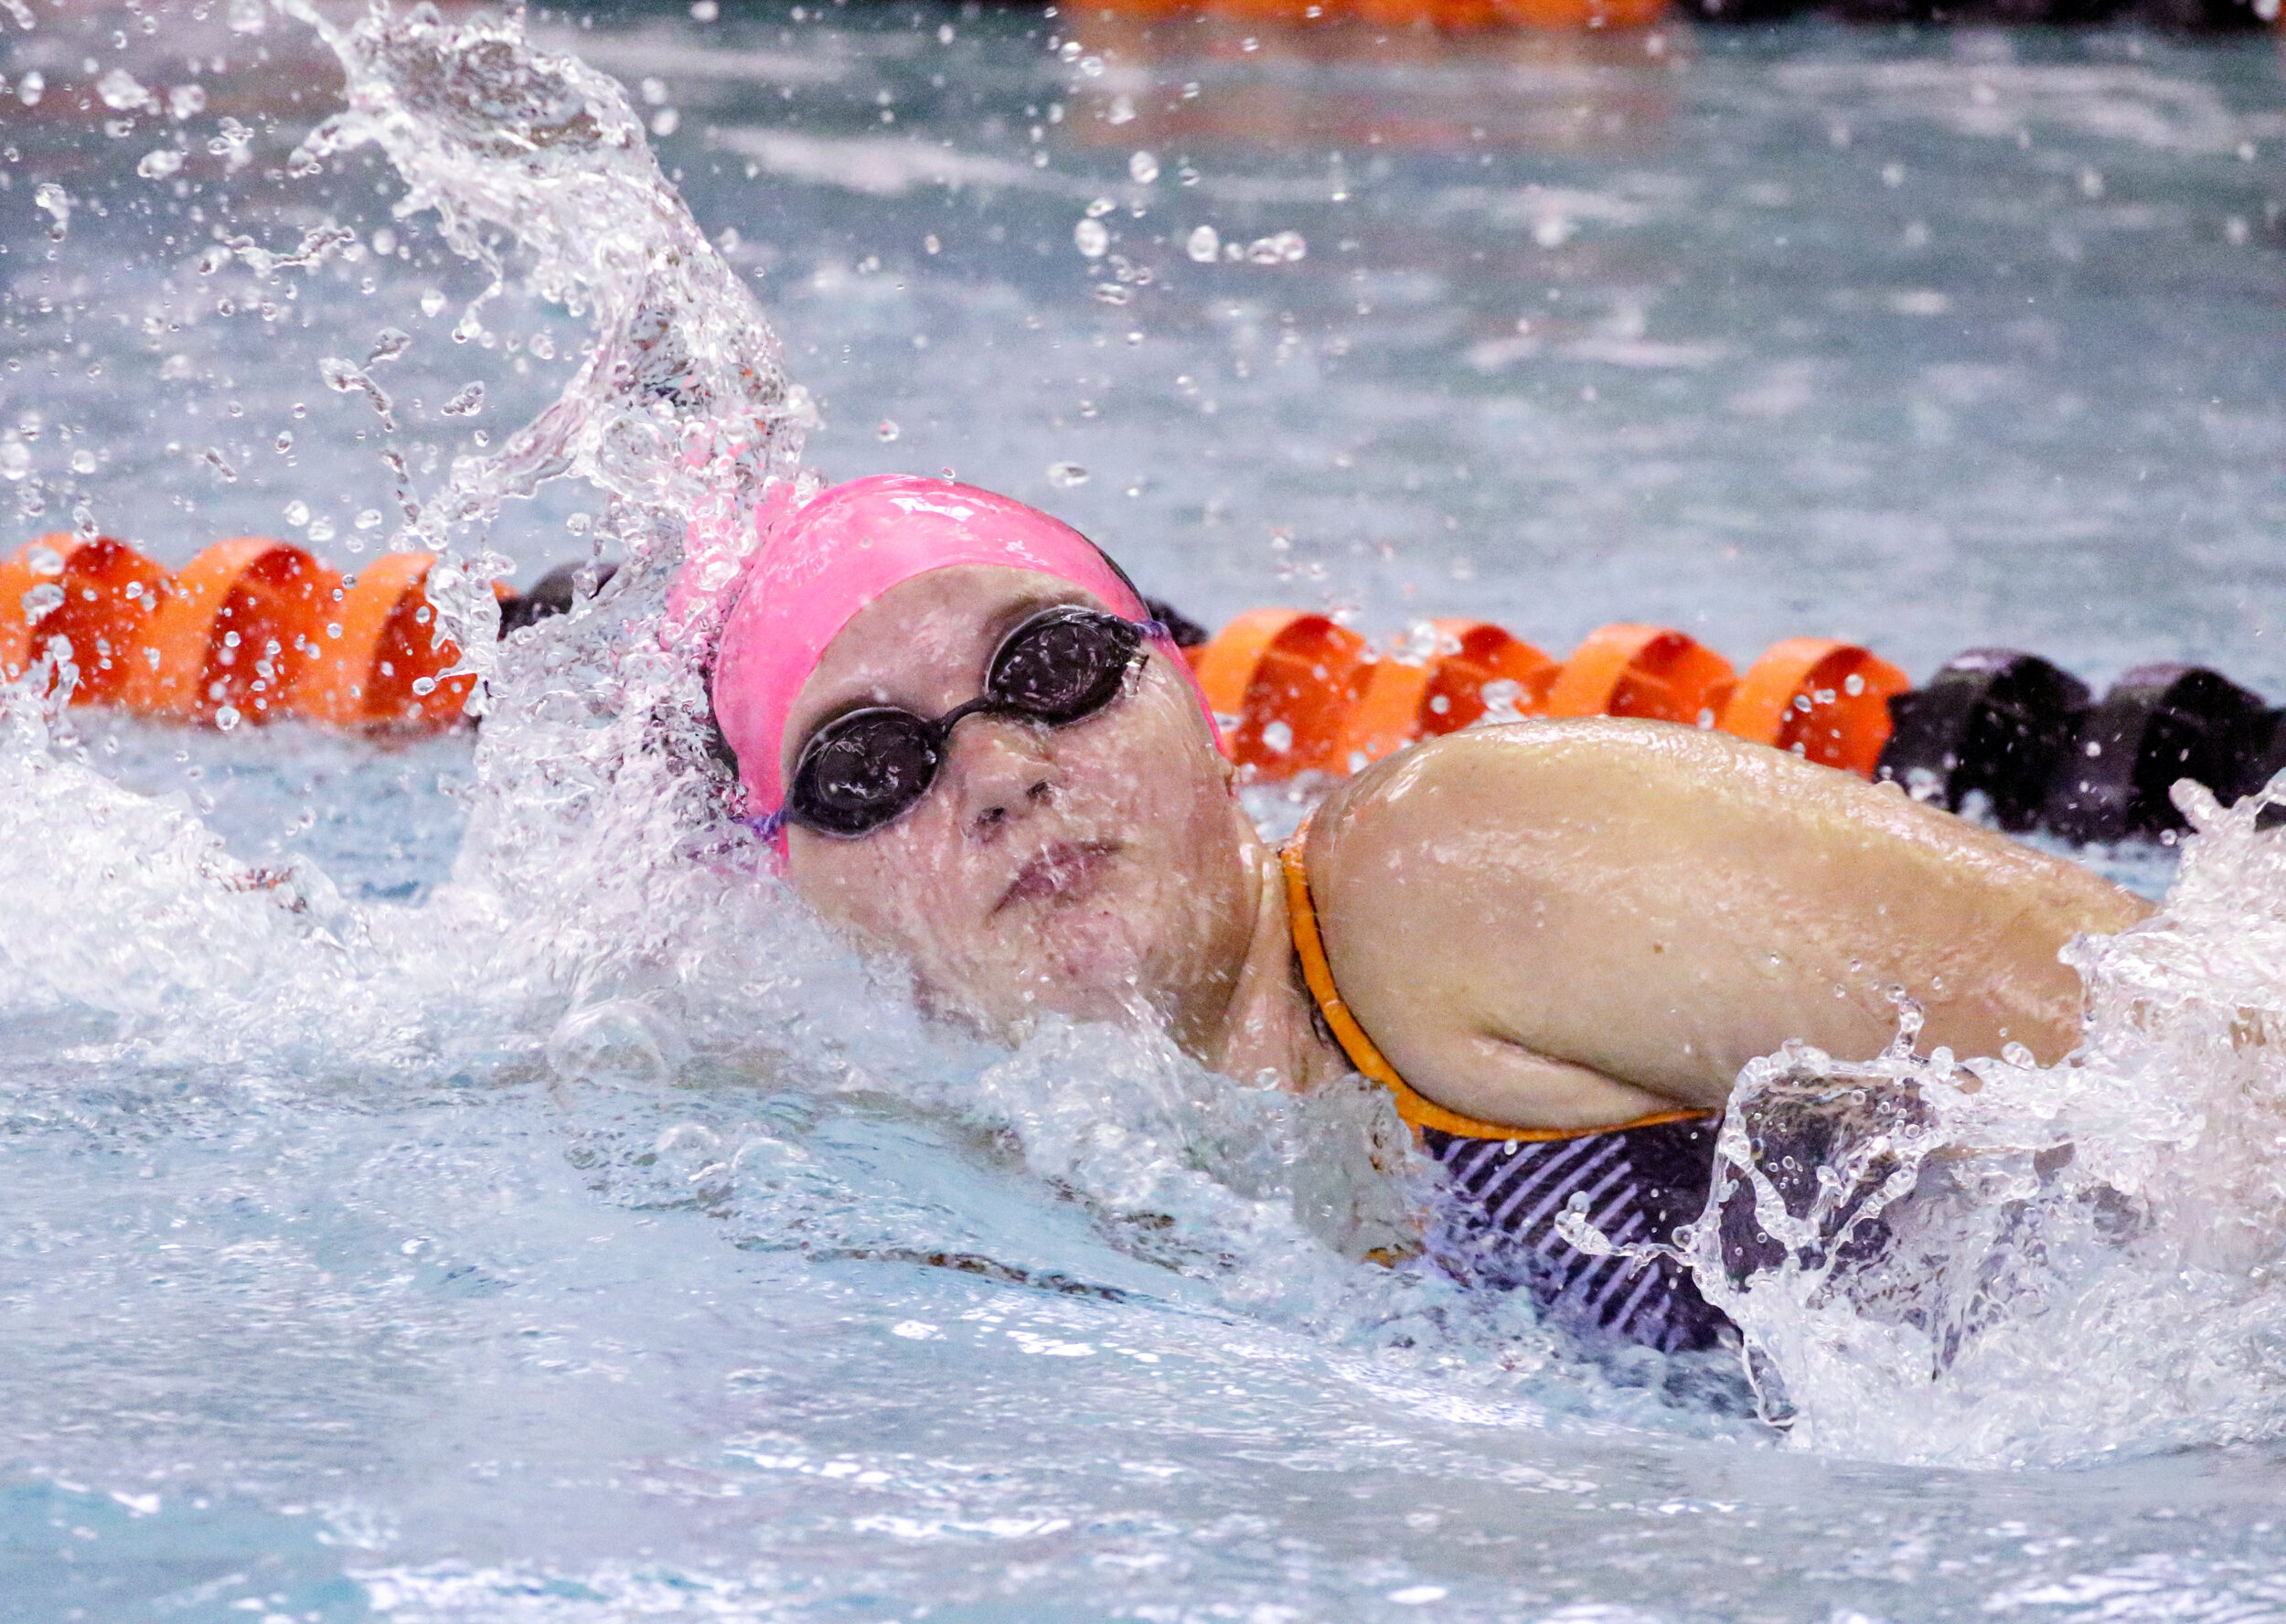  Wellsville’s Kaylee Oswald competes during the 50 freestyle event of Saturday morning’s regular season finale against Hornell, in Wellsville. [Chris Brooks/WellsvilleSports.com] 